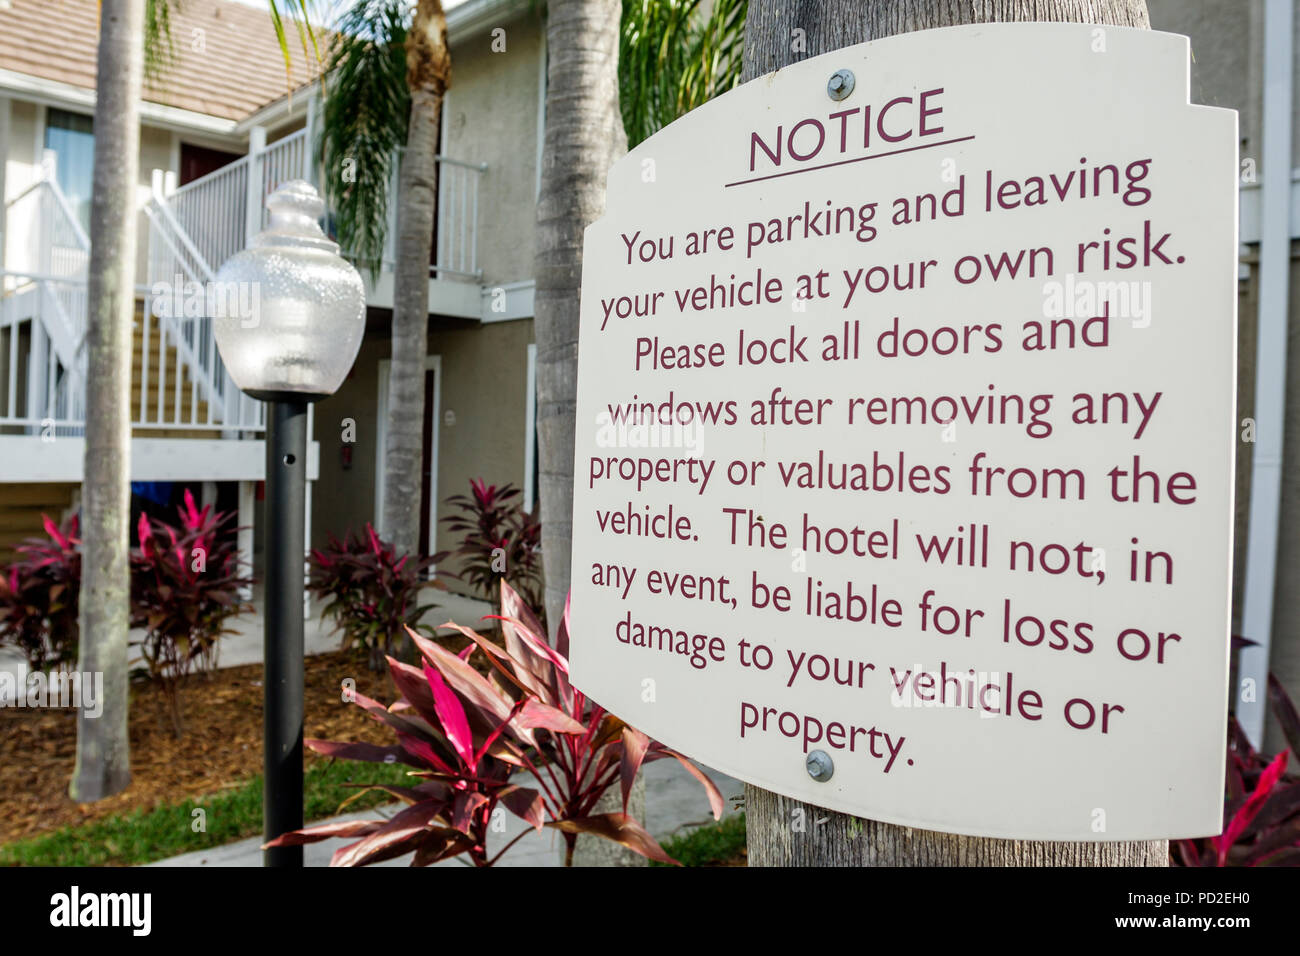 Boca Raton Florida,Palm Beach County,Marriott Residence Inn,motel,lodging,property,sign,warning,disclaimer,notice,hotel not responsible for theft,dama Stock Photo